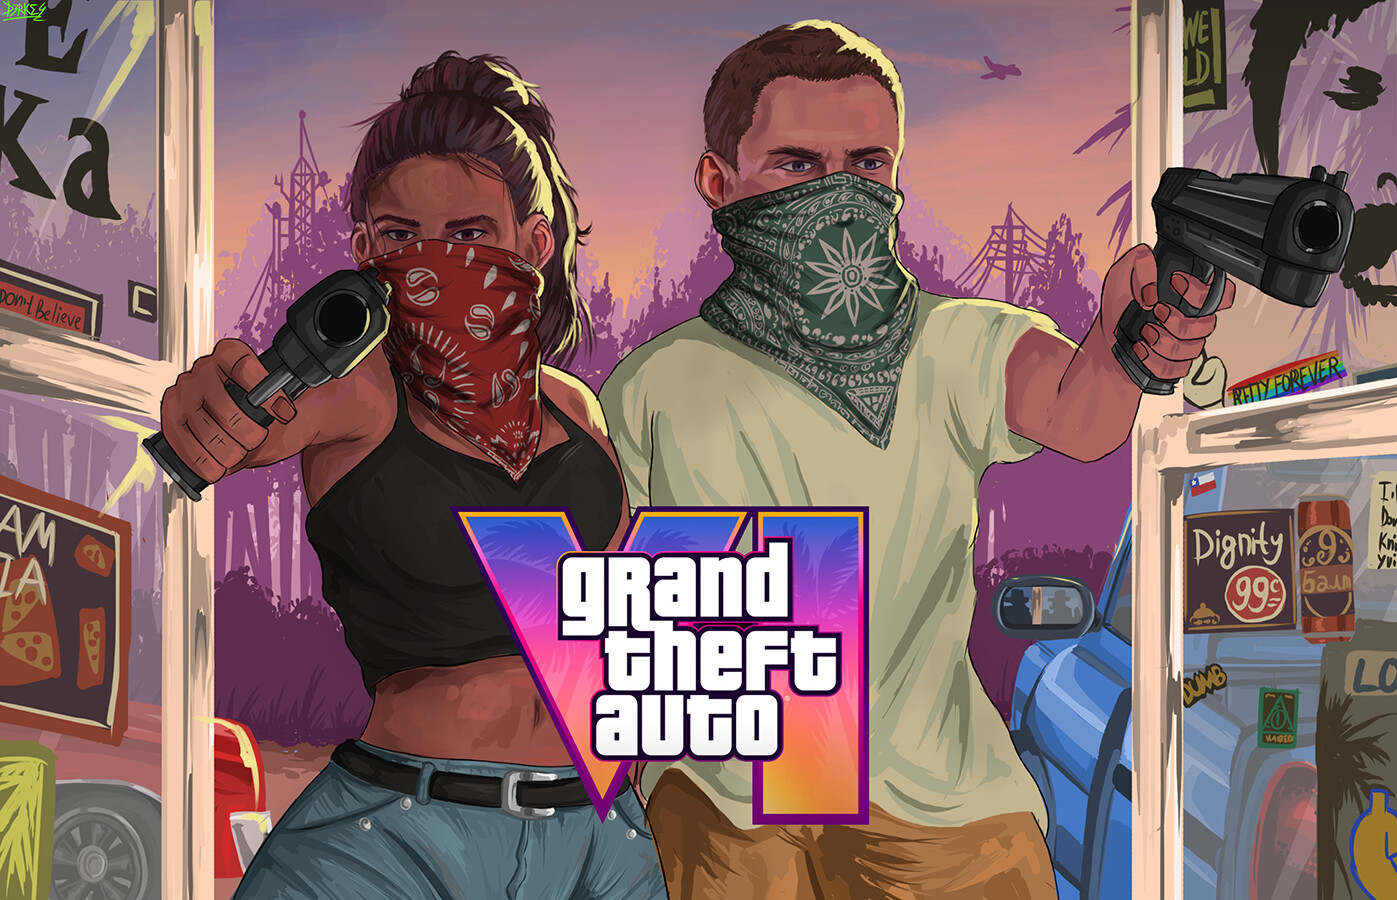 ArtStation - POSTER CREATED BY FAN OF GRAN THEFT AUTO VI - [NonProfit]